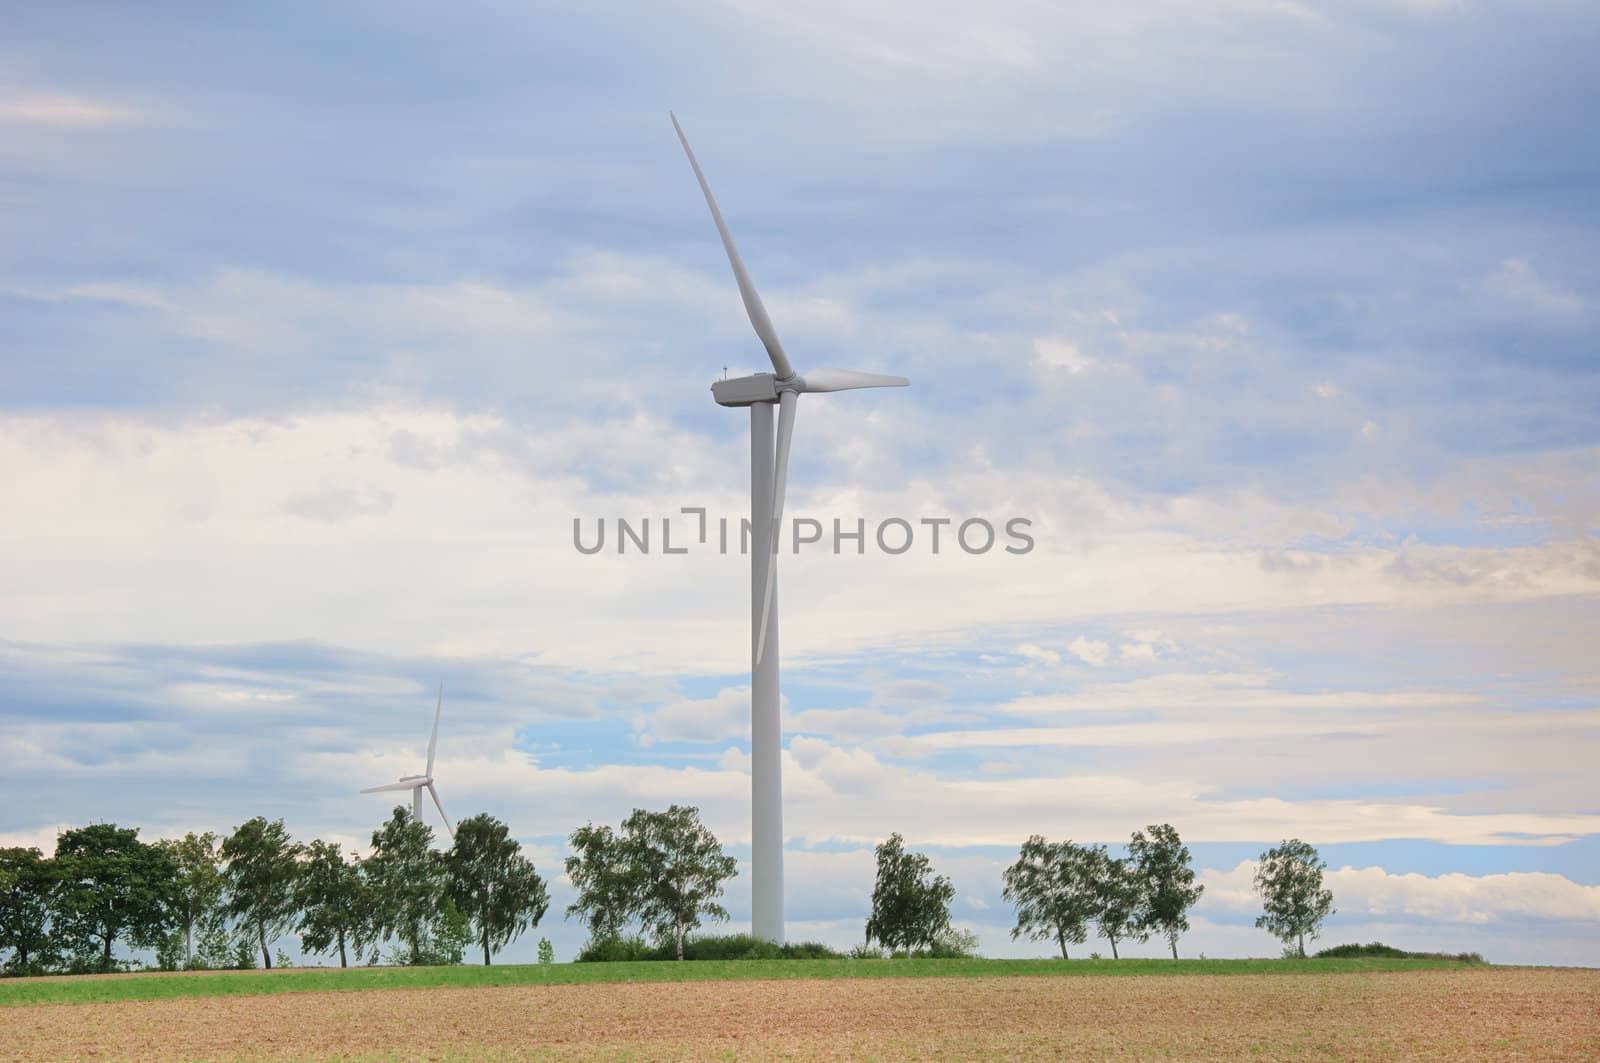 Wind turbines to generate electricity from wind in Germany.
